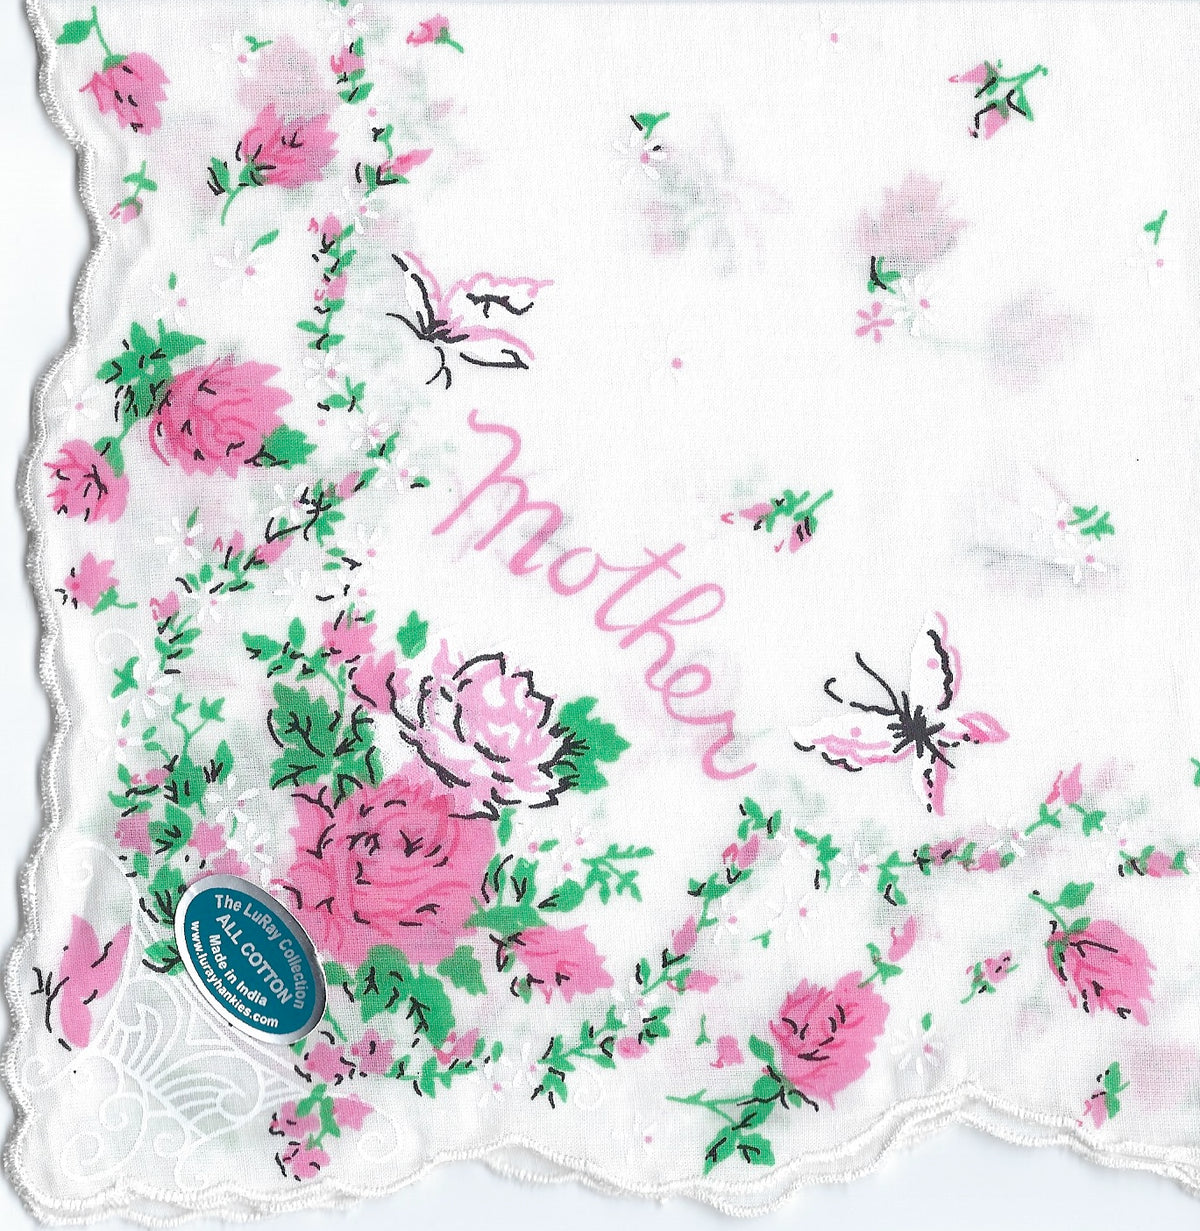 Vintage-Inspired Hanky - Mother with Roses & Butterflies  Hanky